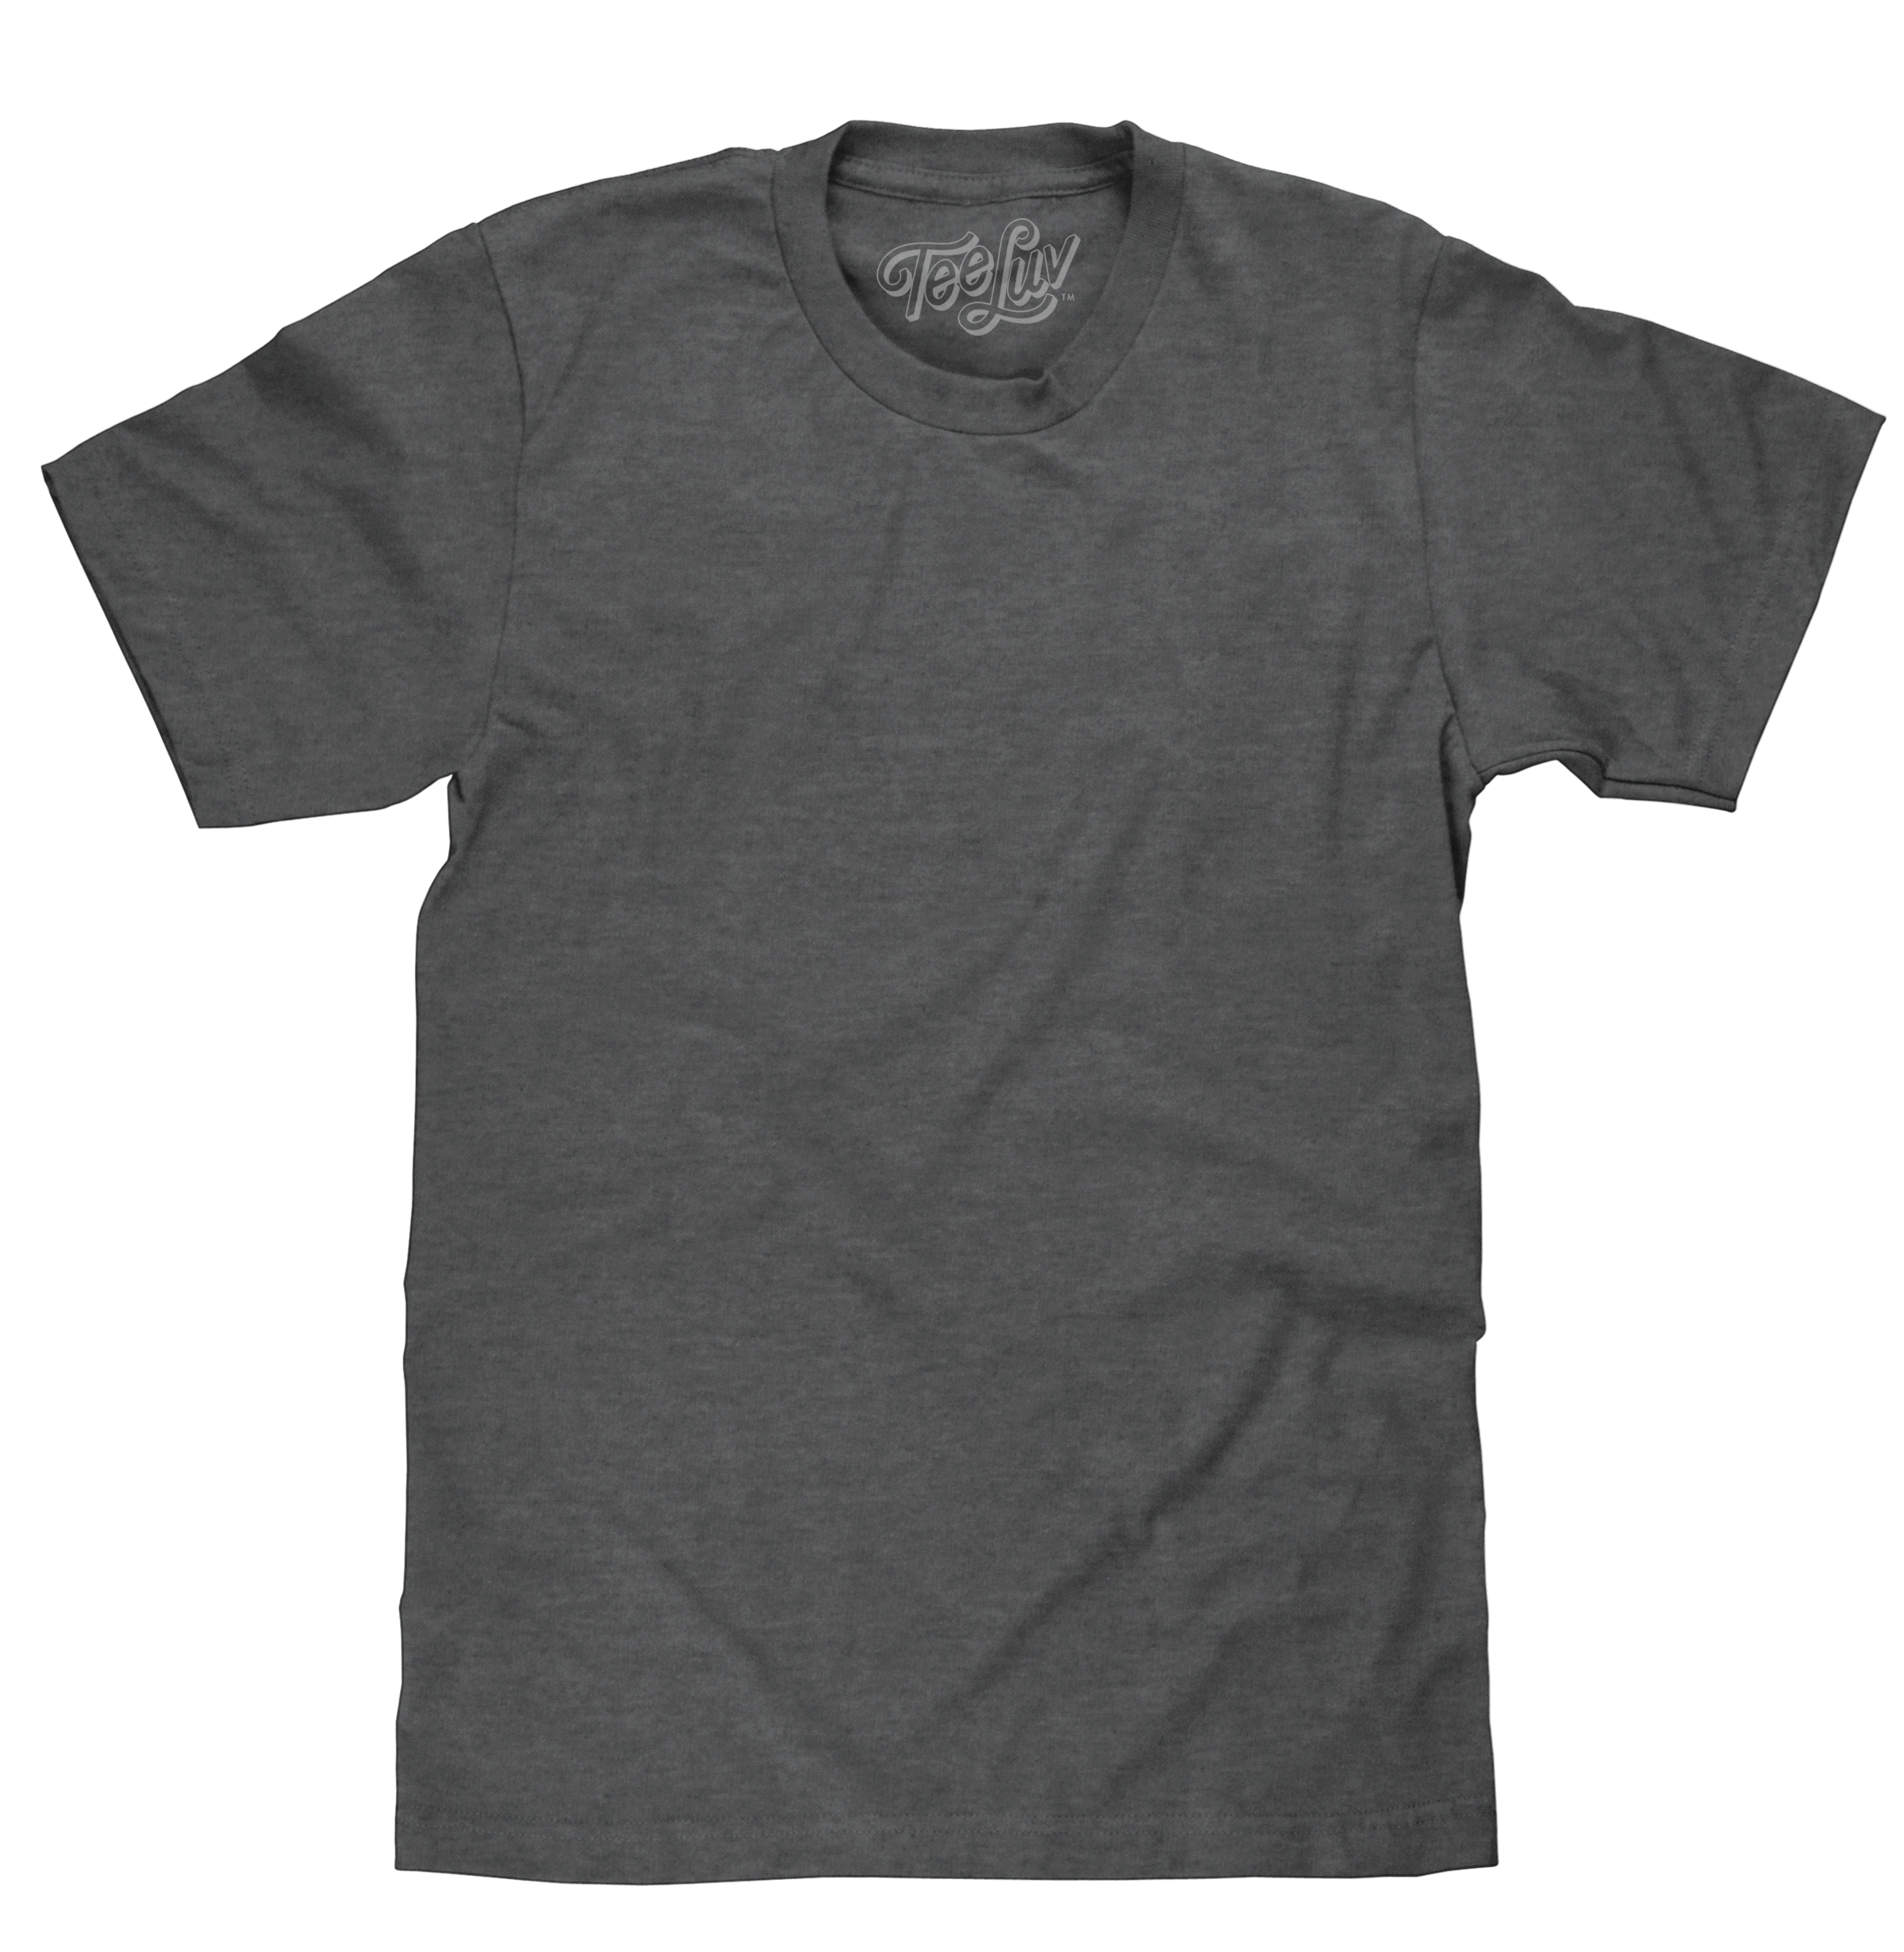 Tee Luv Charcoal Heather Blank T-Shirt - Gray Large